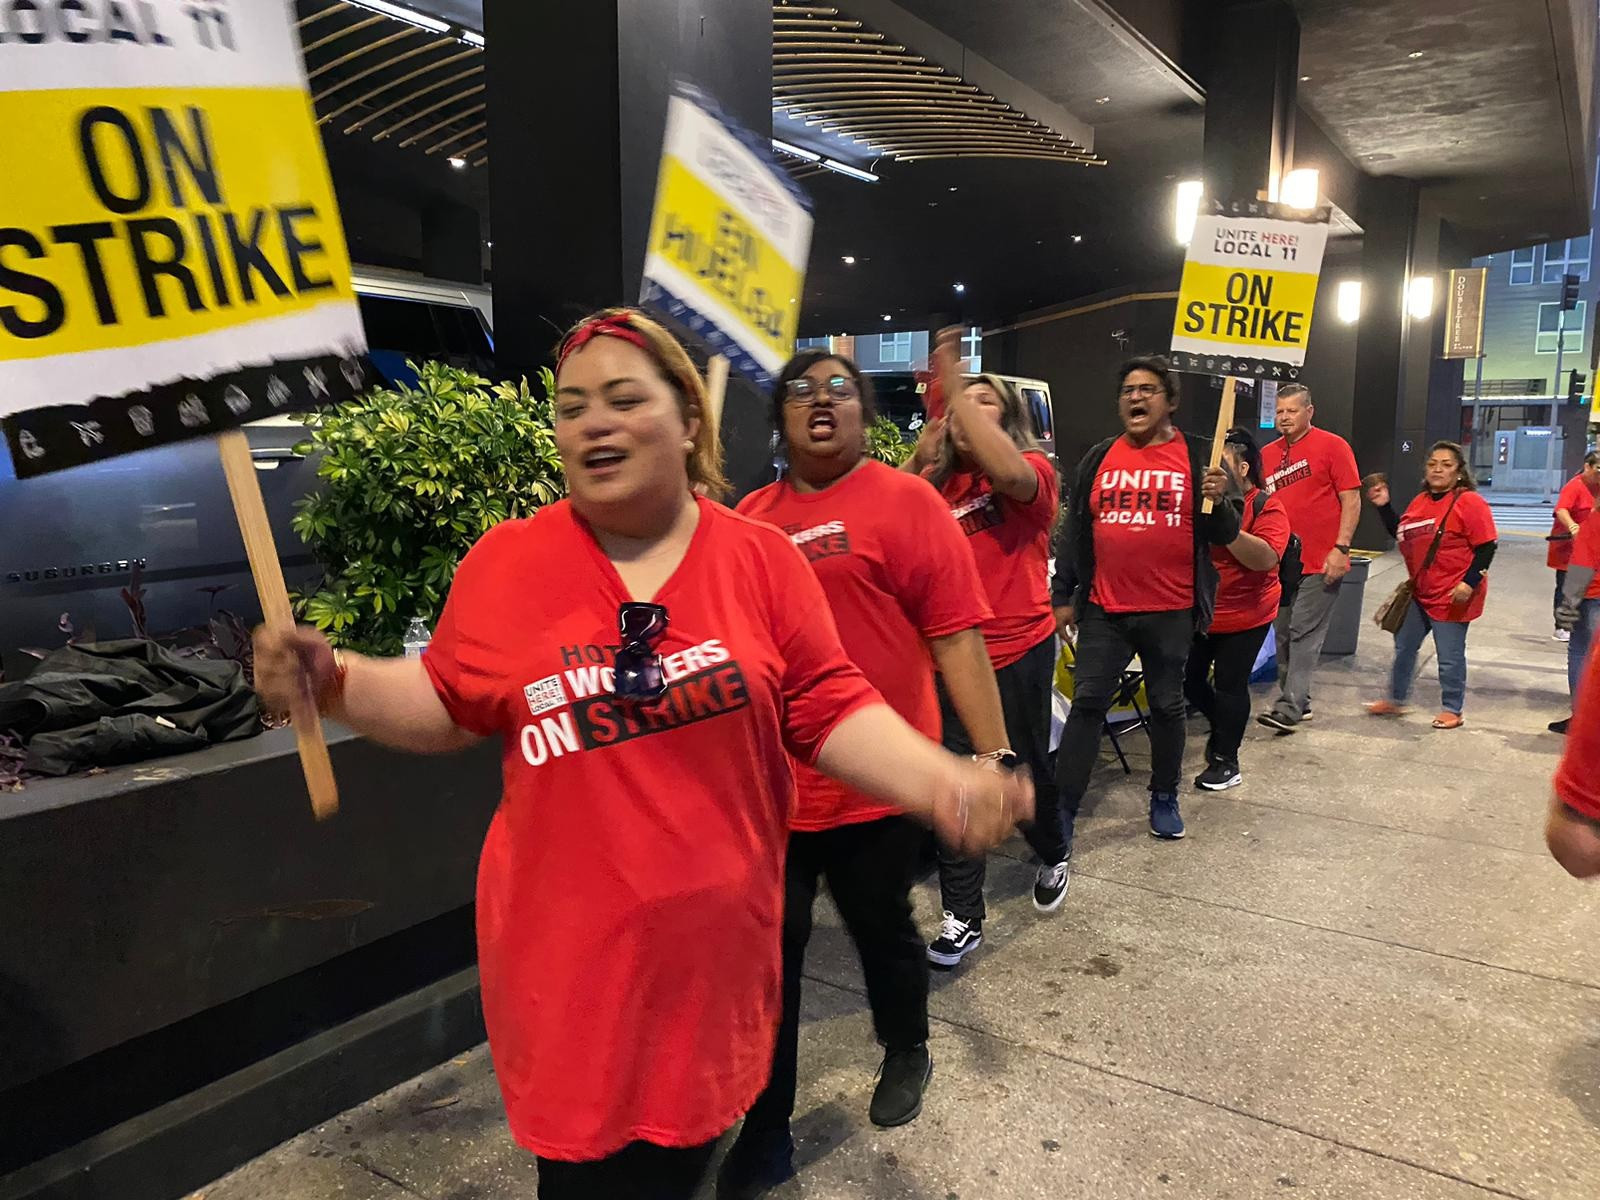 Thousands of hotel workers go on strike seeking better conditions before LA 2028